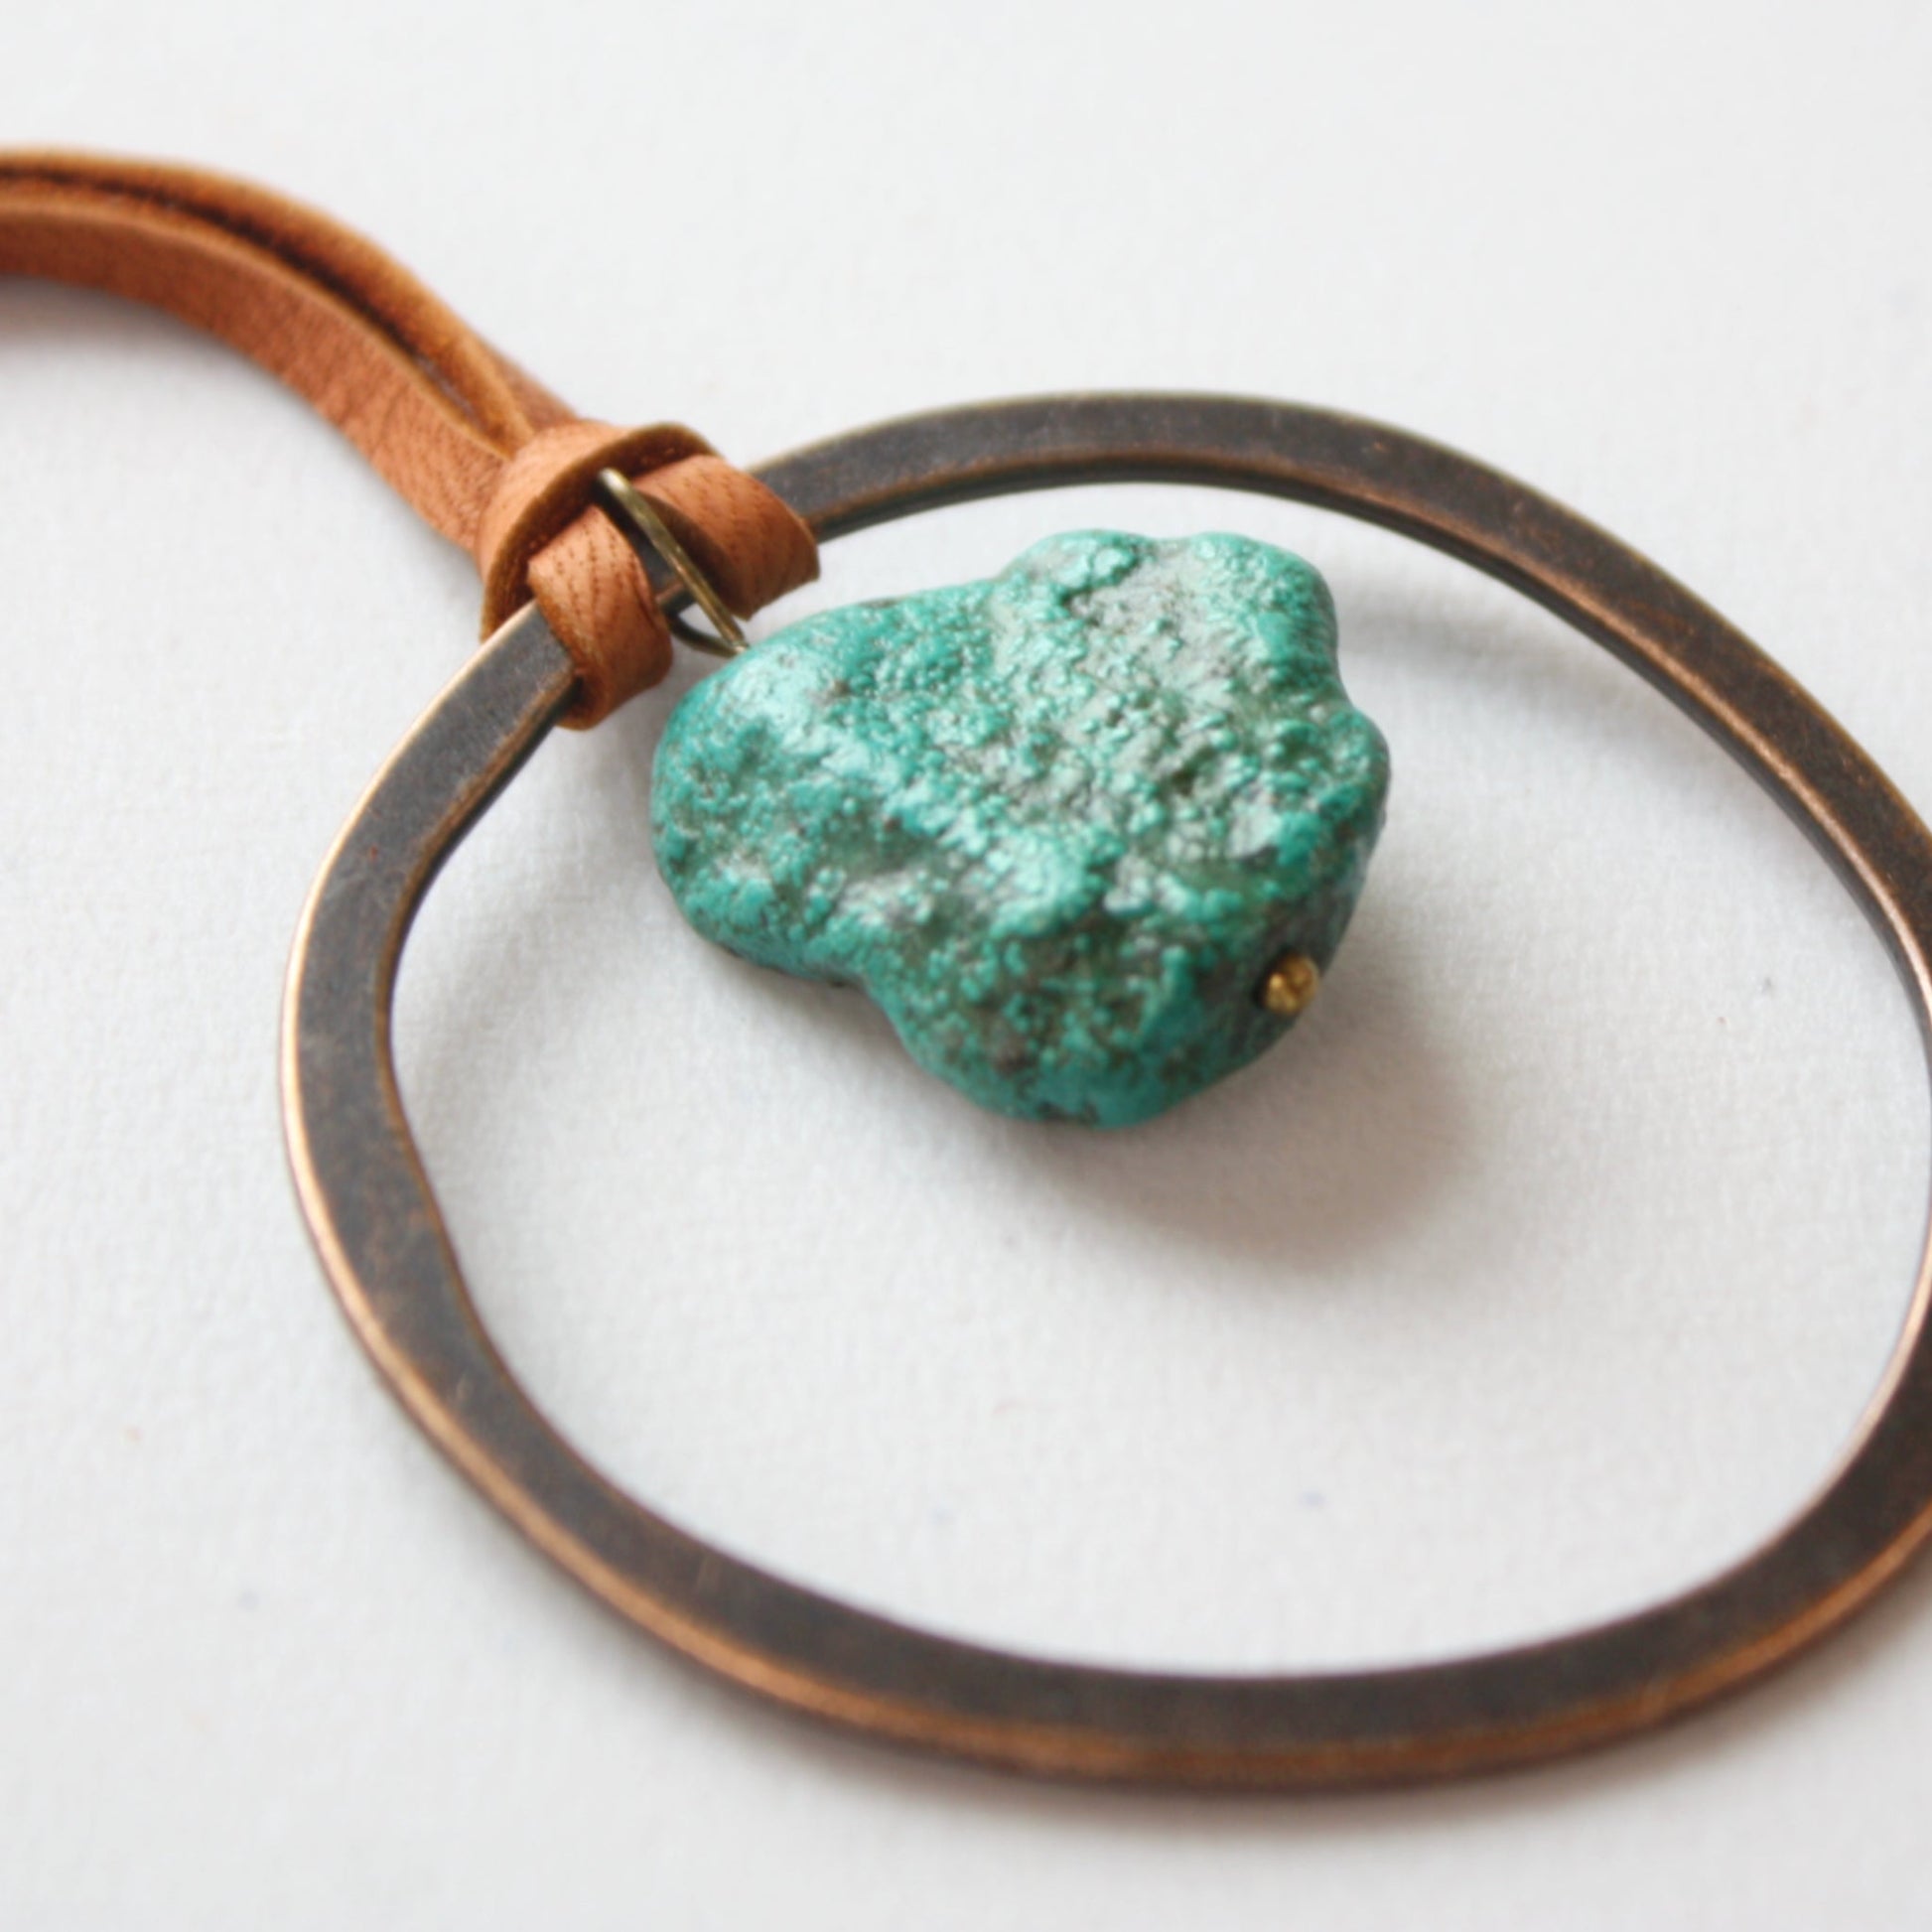 Leather Cord Necklace - Antique Gold/Turquoise - Handmade in The USA